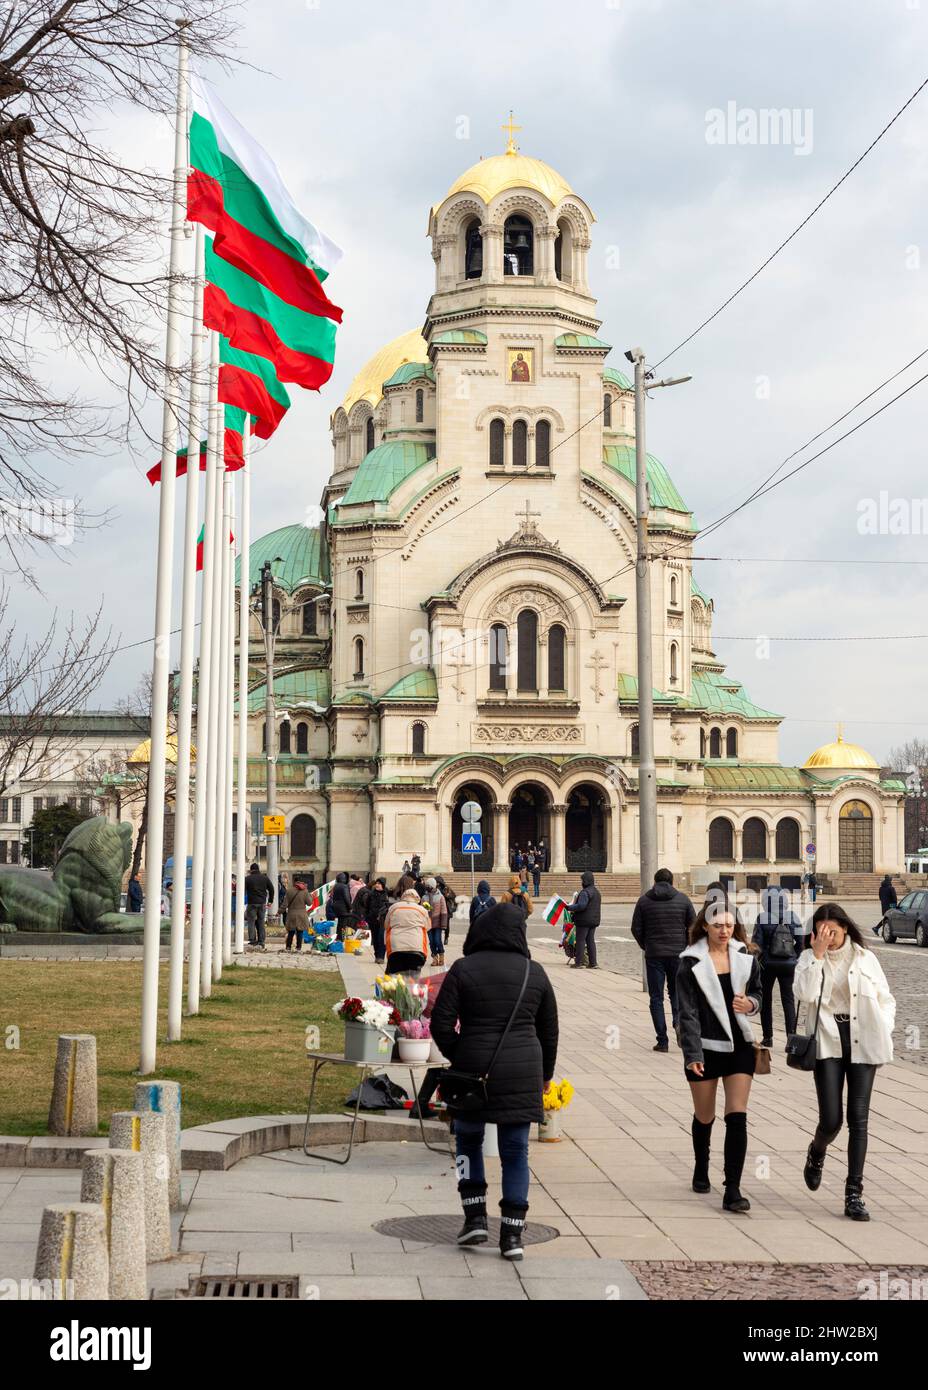 Sofia Bulgaria National Flags flying at the Alexander Nevsky Cathedral and St. Sophia Church by the Monument to the Unknown Warrior in respect and commemoration to the Bulgarian soldiers lost their lives in wars as Bulgarians celebrate the Bulgaria National Day. Stock Photo